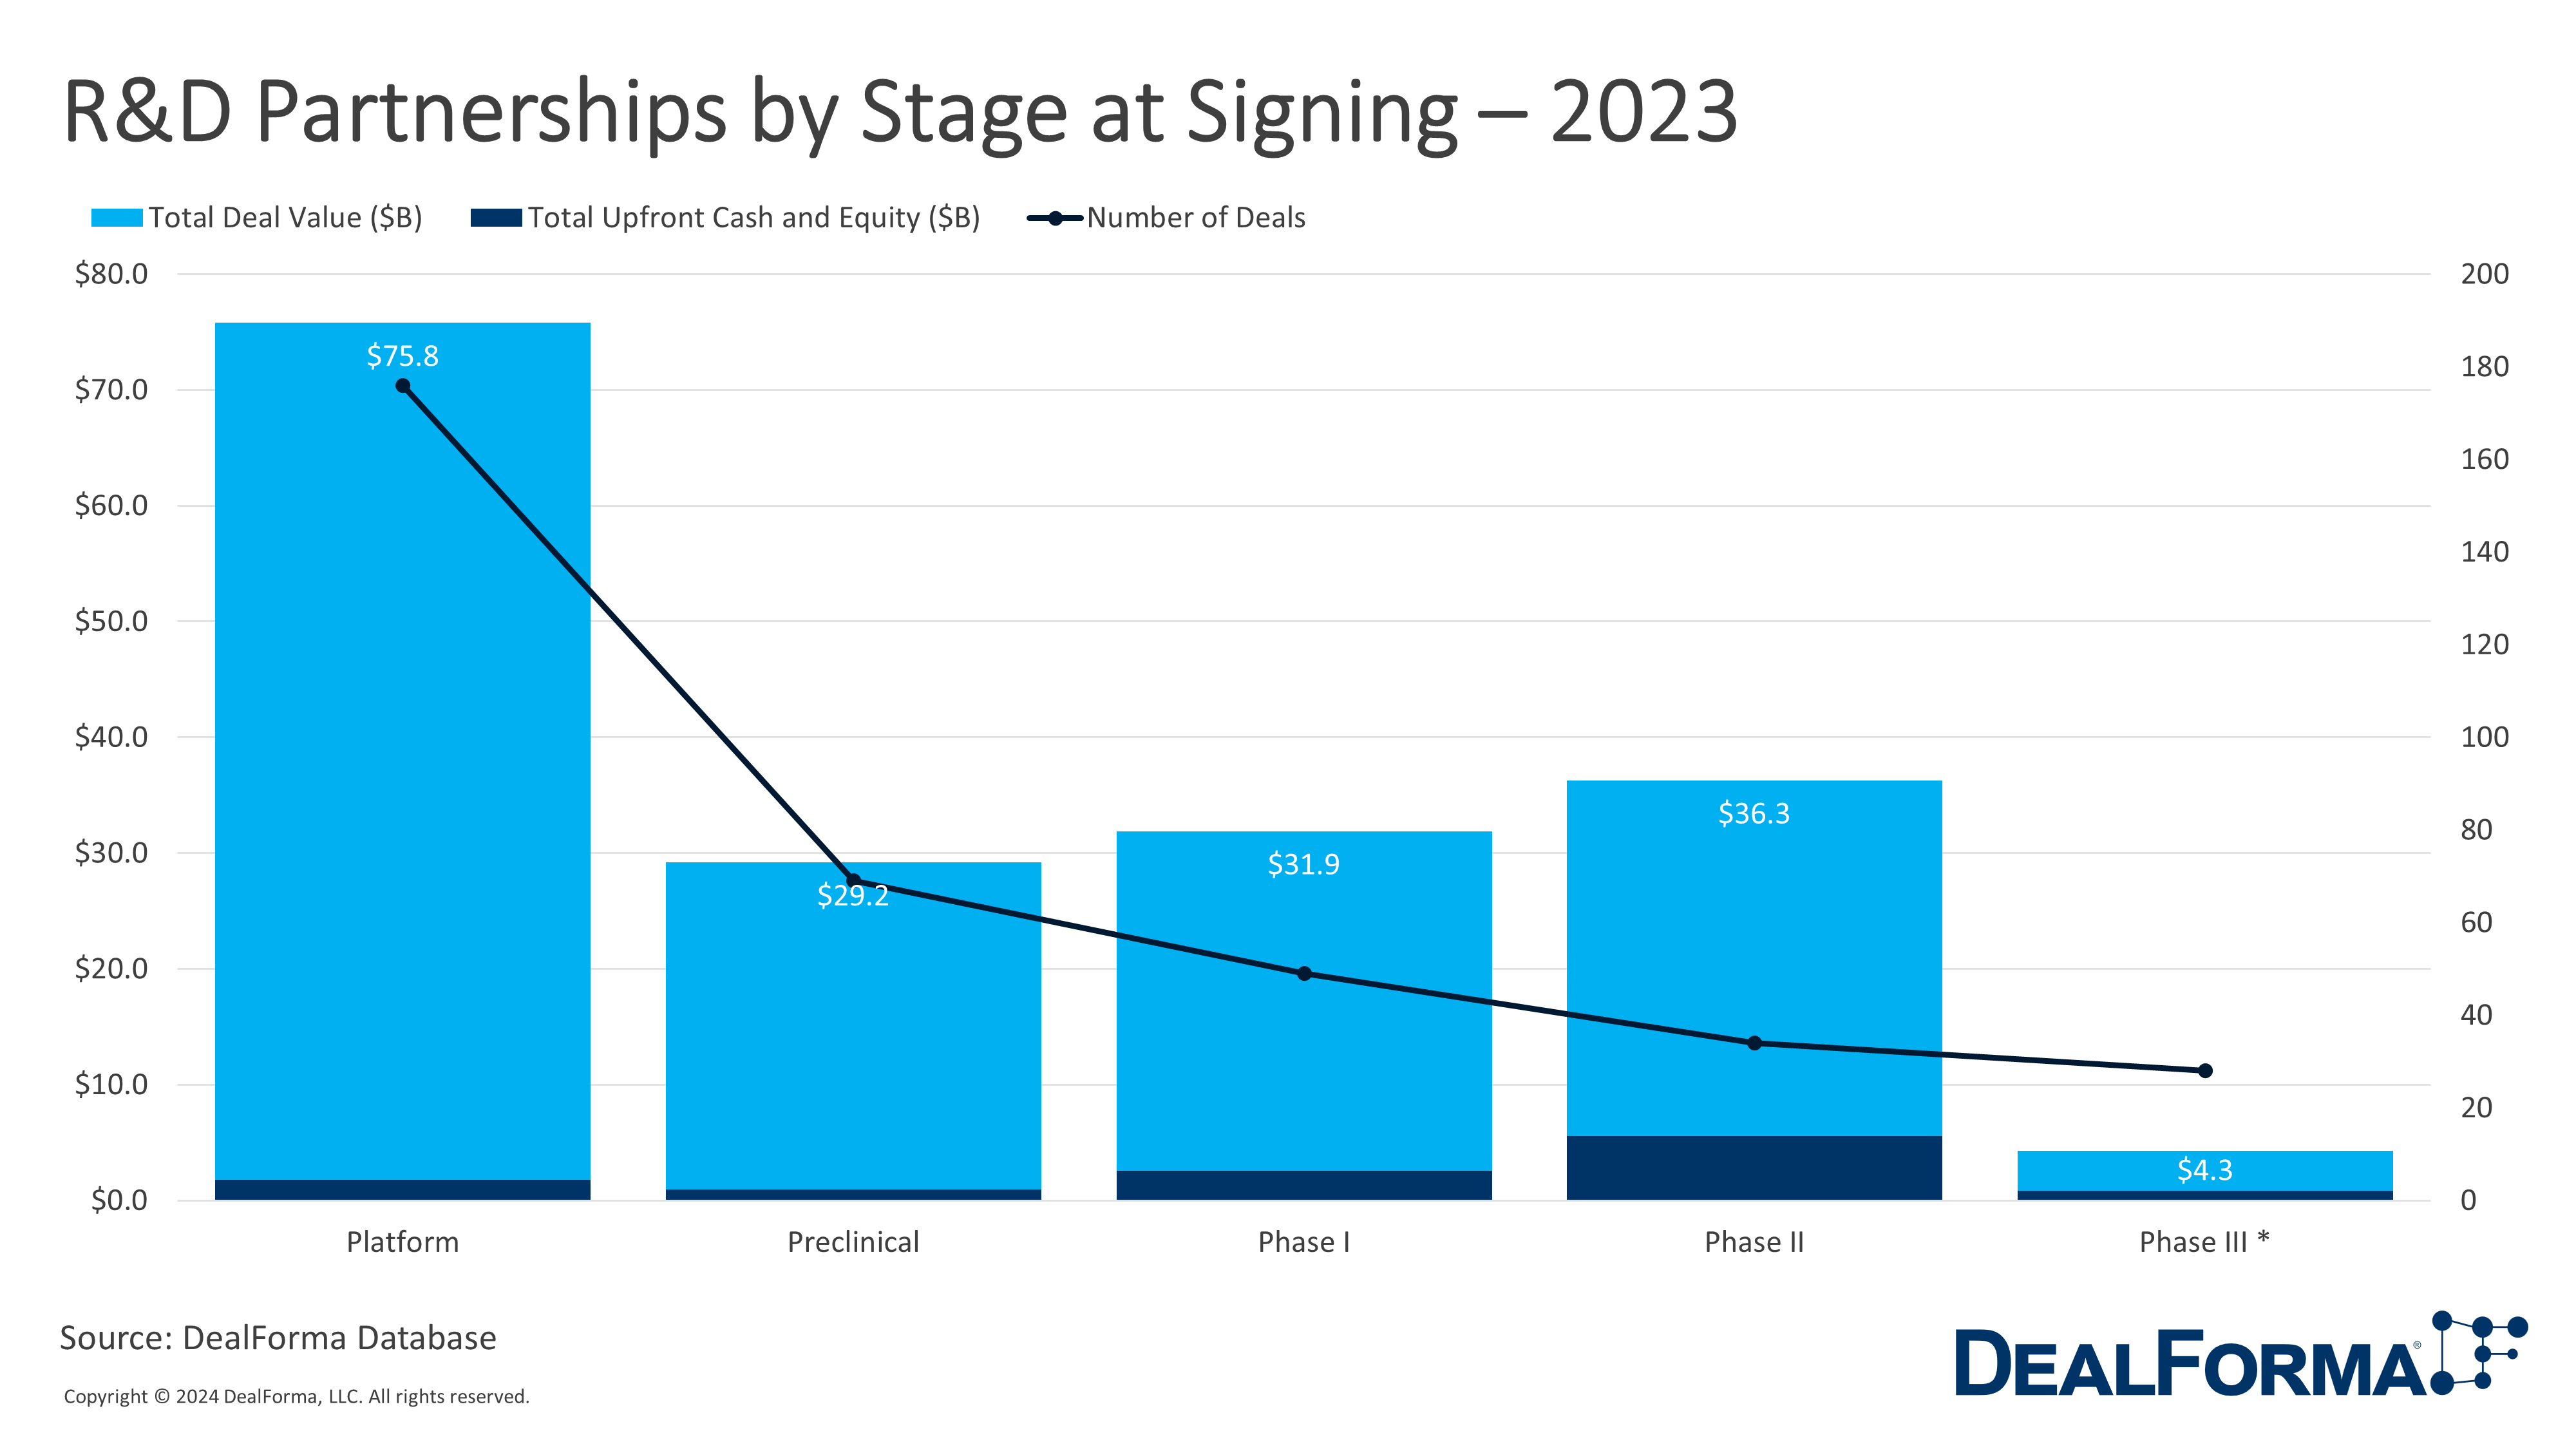 R&D Partnerships by Stage at Signing - 2003 - DealForma